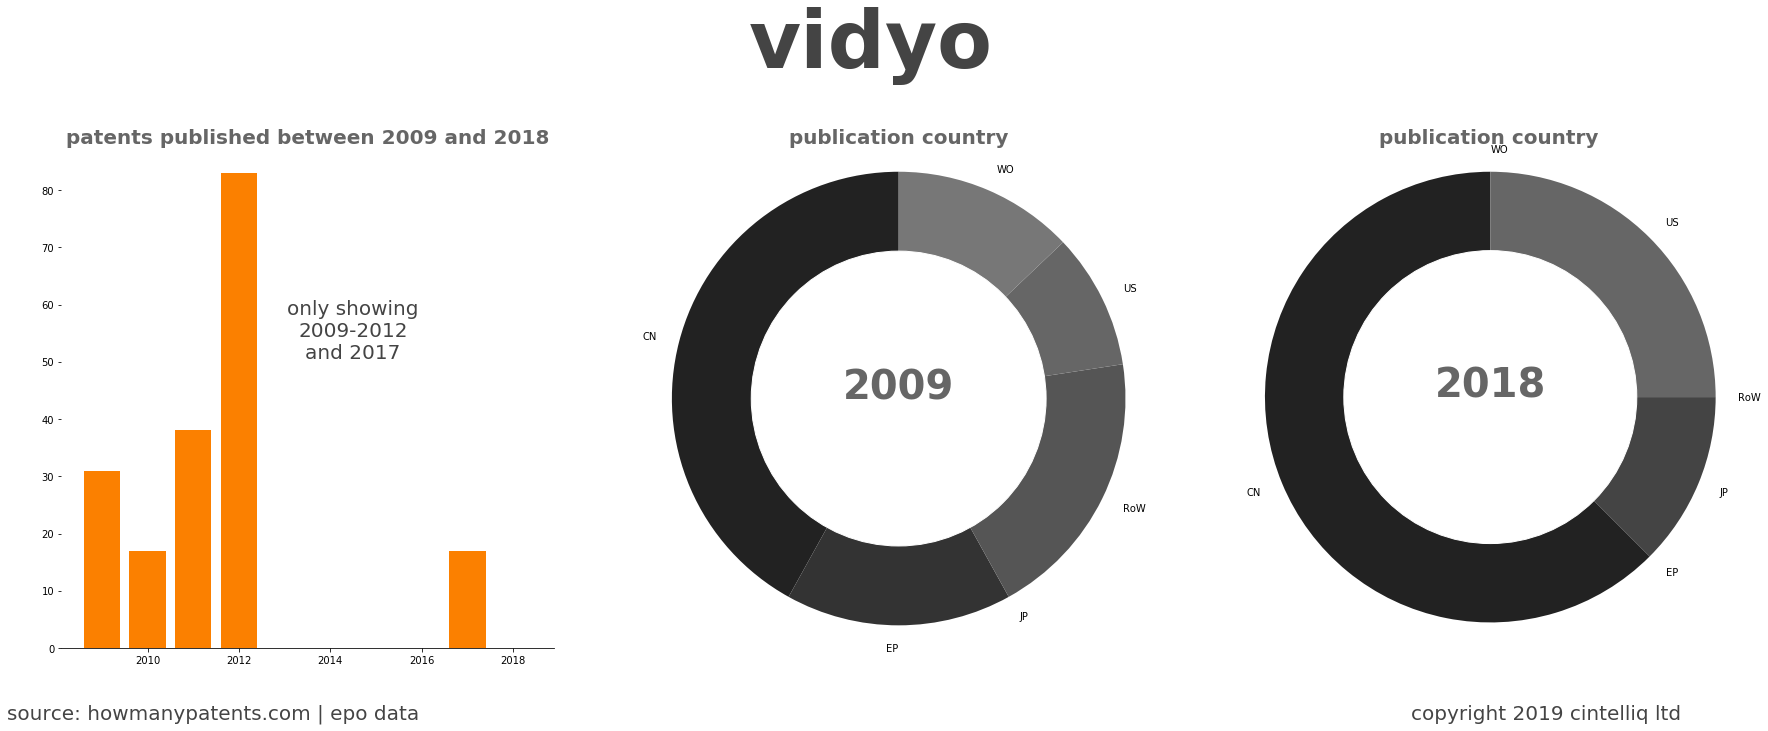 summary of patents for Vidyo